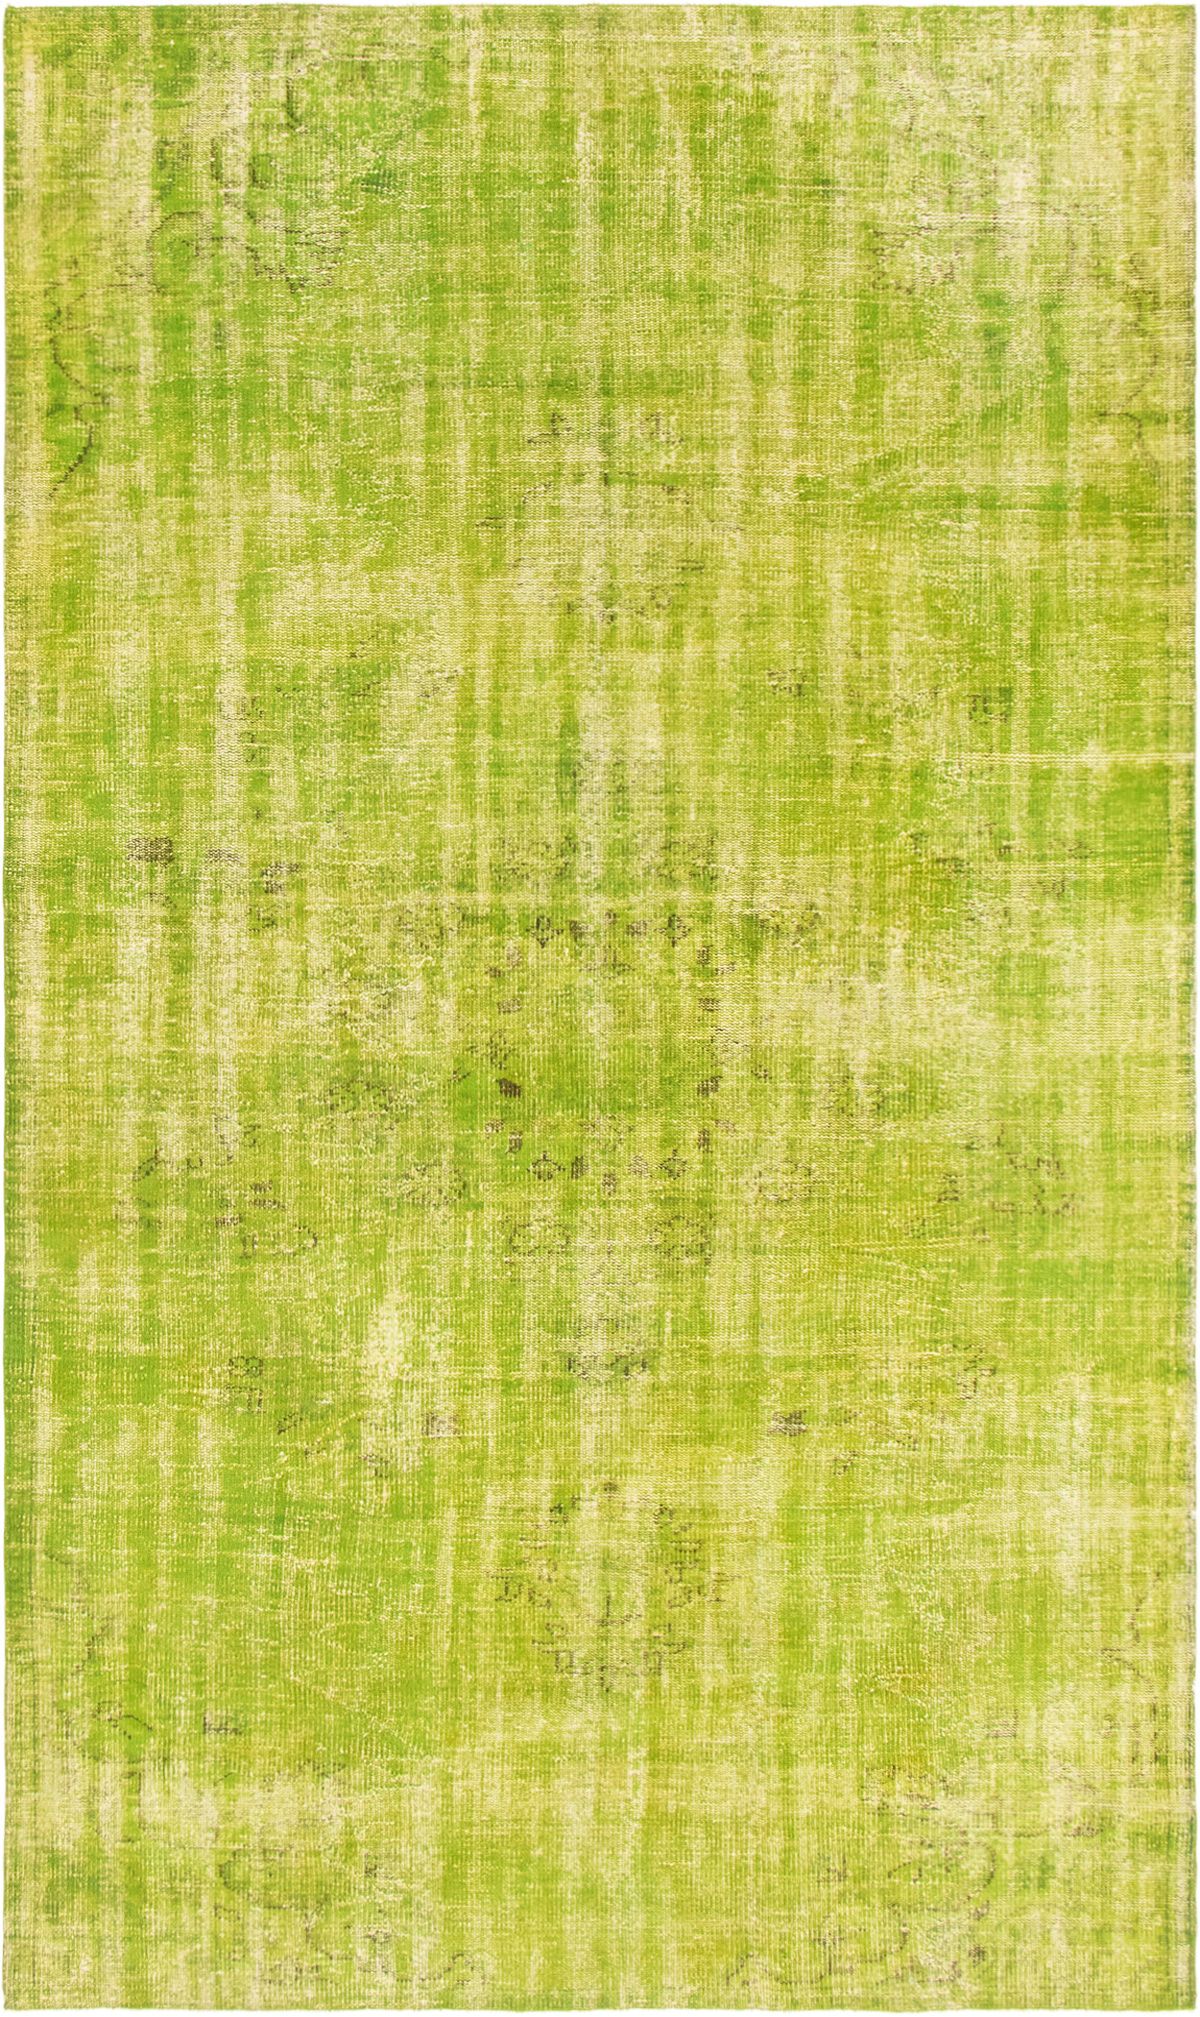 Hand-knotted Color Transition Light Green Wool Rug 6'4" x 10'10" Size: 6'4" x 10'10"  